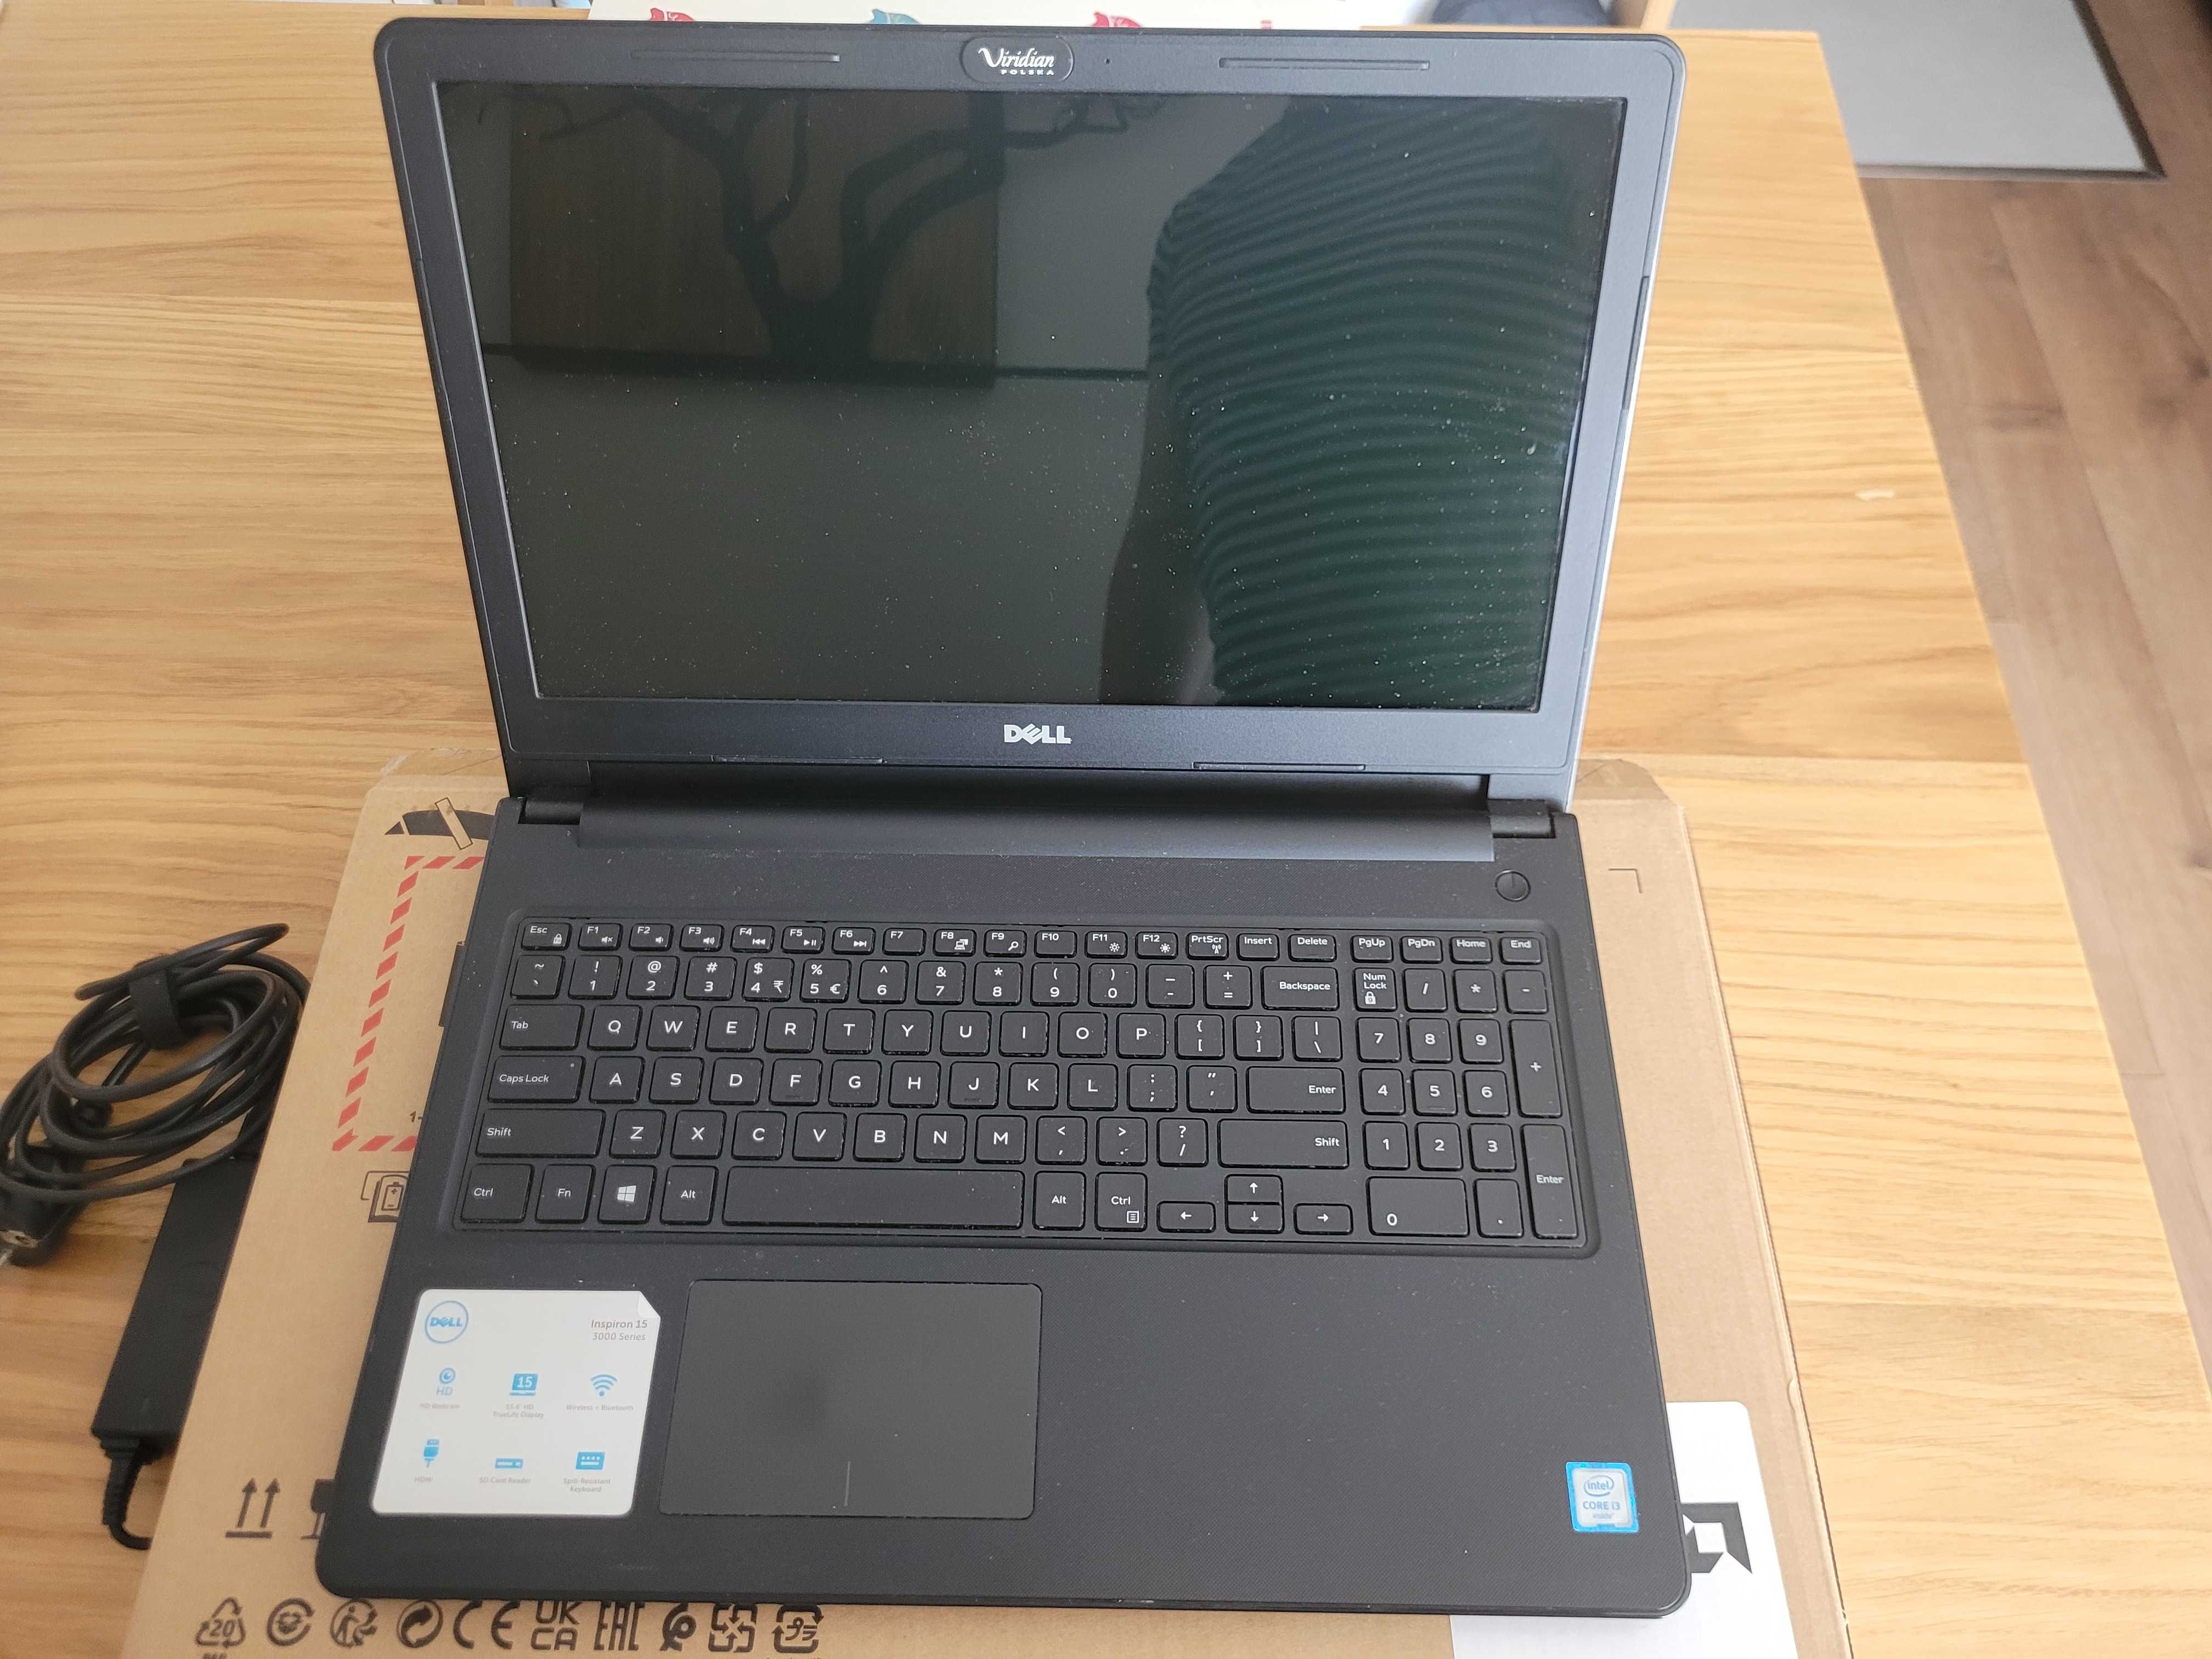 Laptop DELL Inspirion 15 3000series - dysk SSD